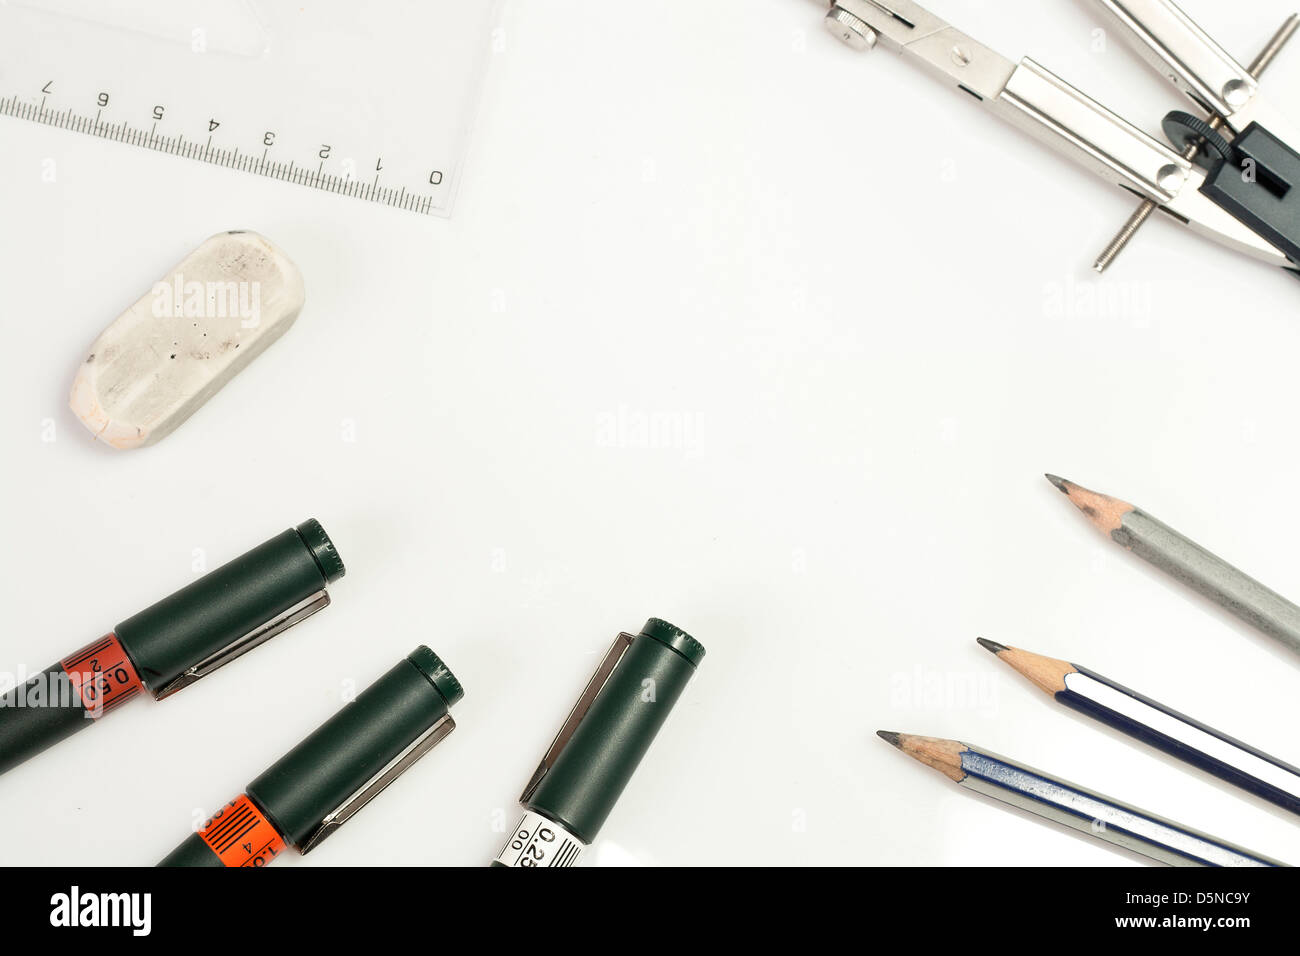 Background made of ruler, drawing compass, technical pens, pencils, rubber gum isolated on white background Stock Photo